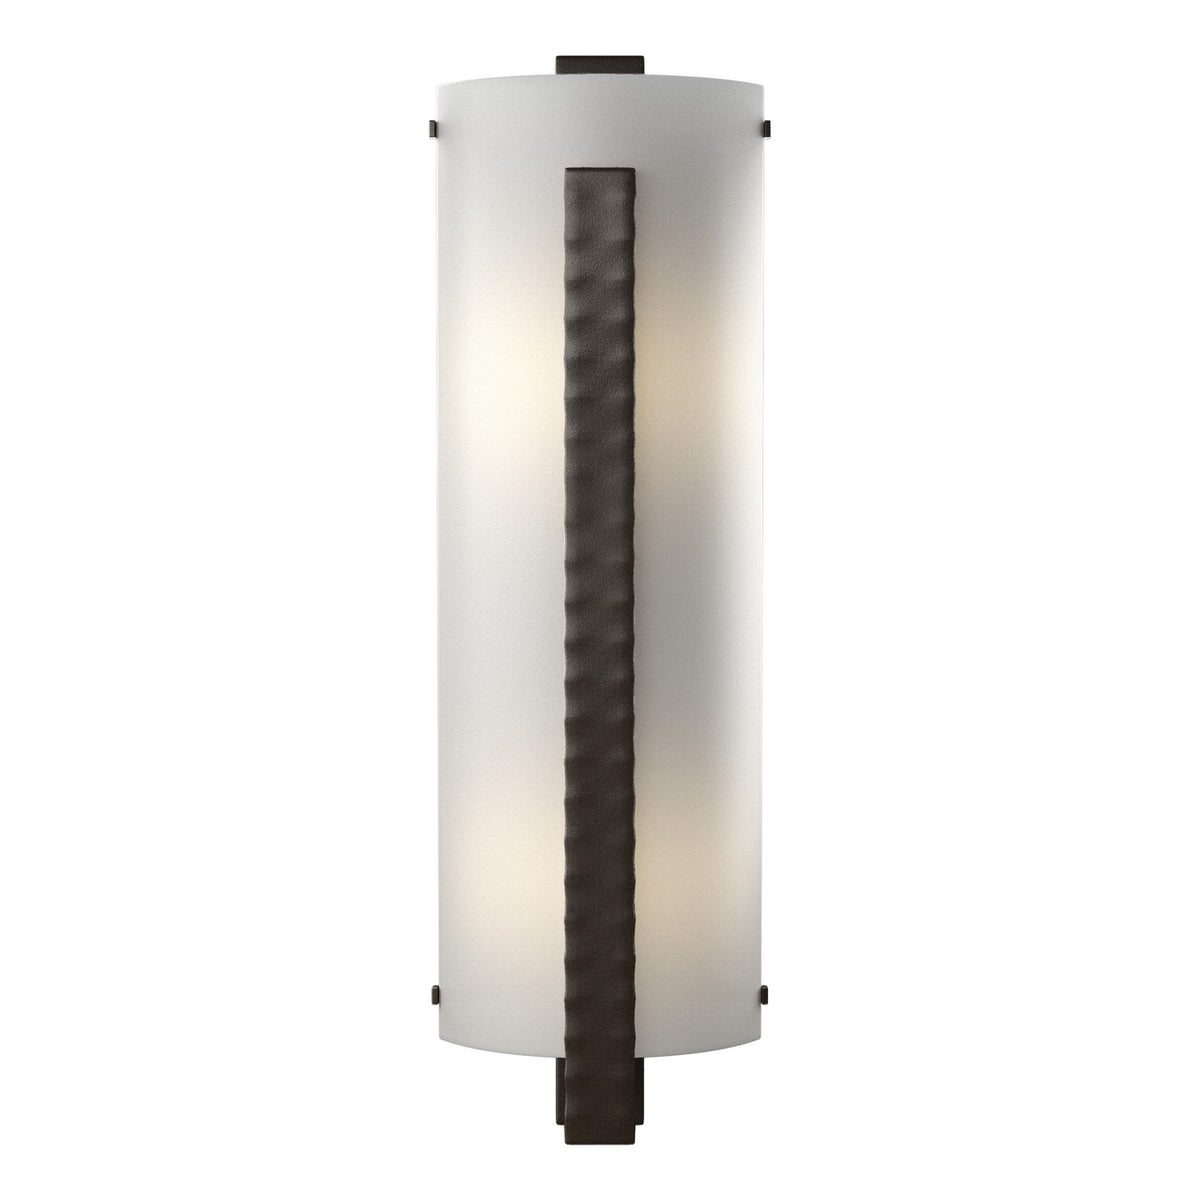 Hubbardton Forge - 206730-SKT-14-BB0401 - Two Light Wall Sconce - Vertical Bar - Oil Rubbed Bronze